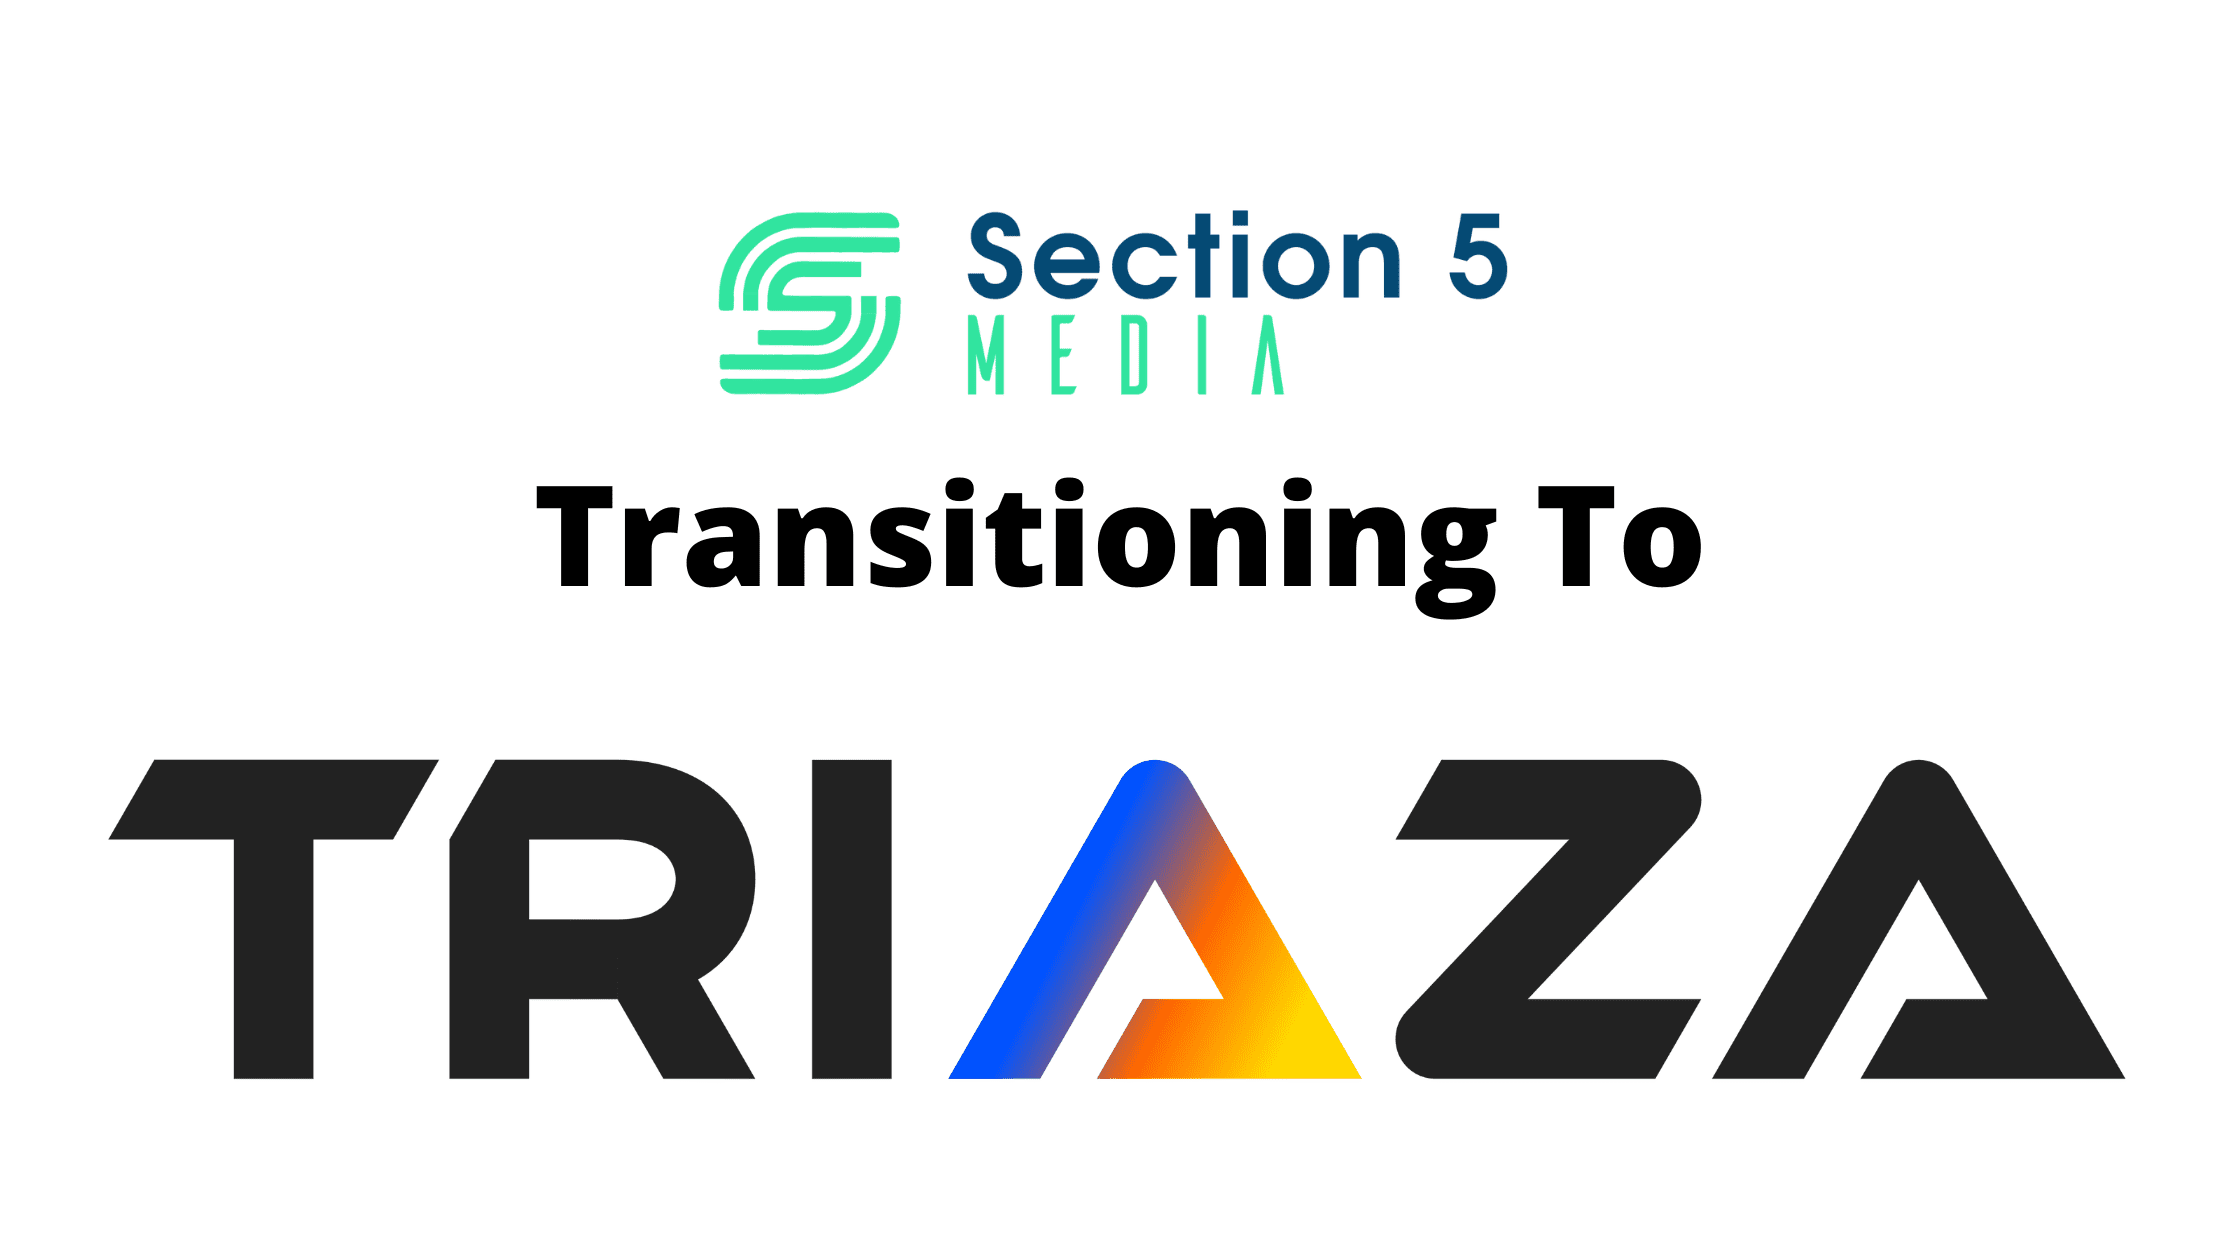 Section 5 Media transitioning to TRIAZA